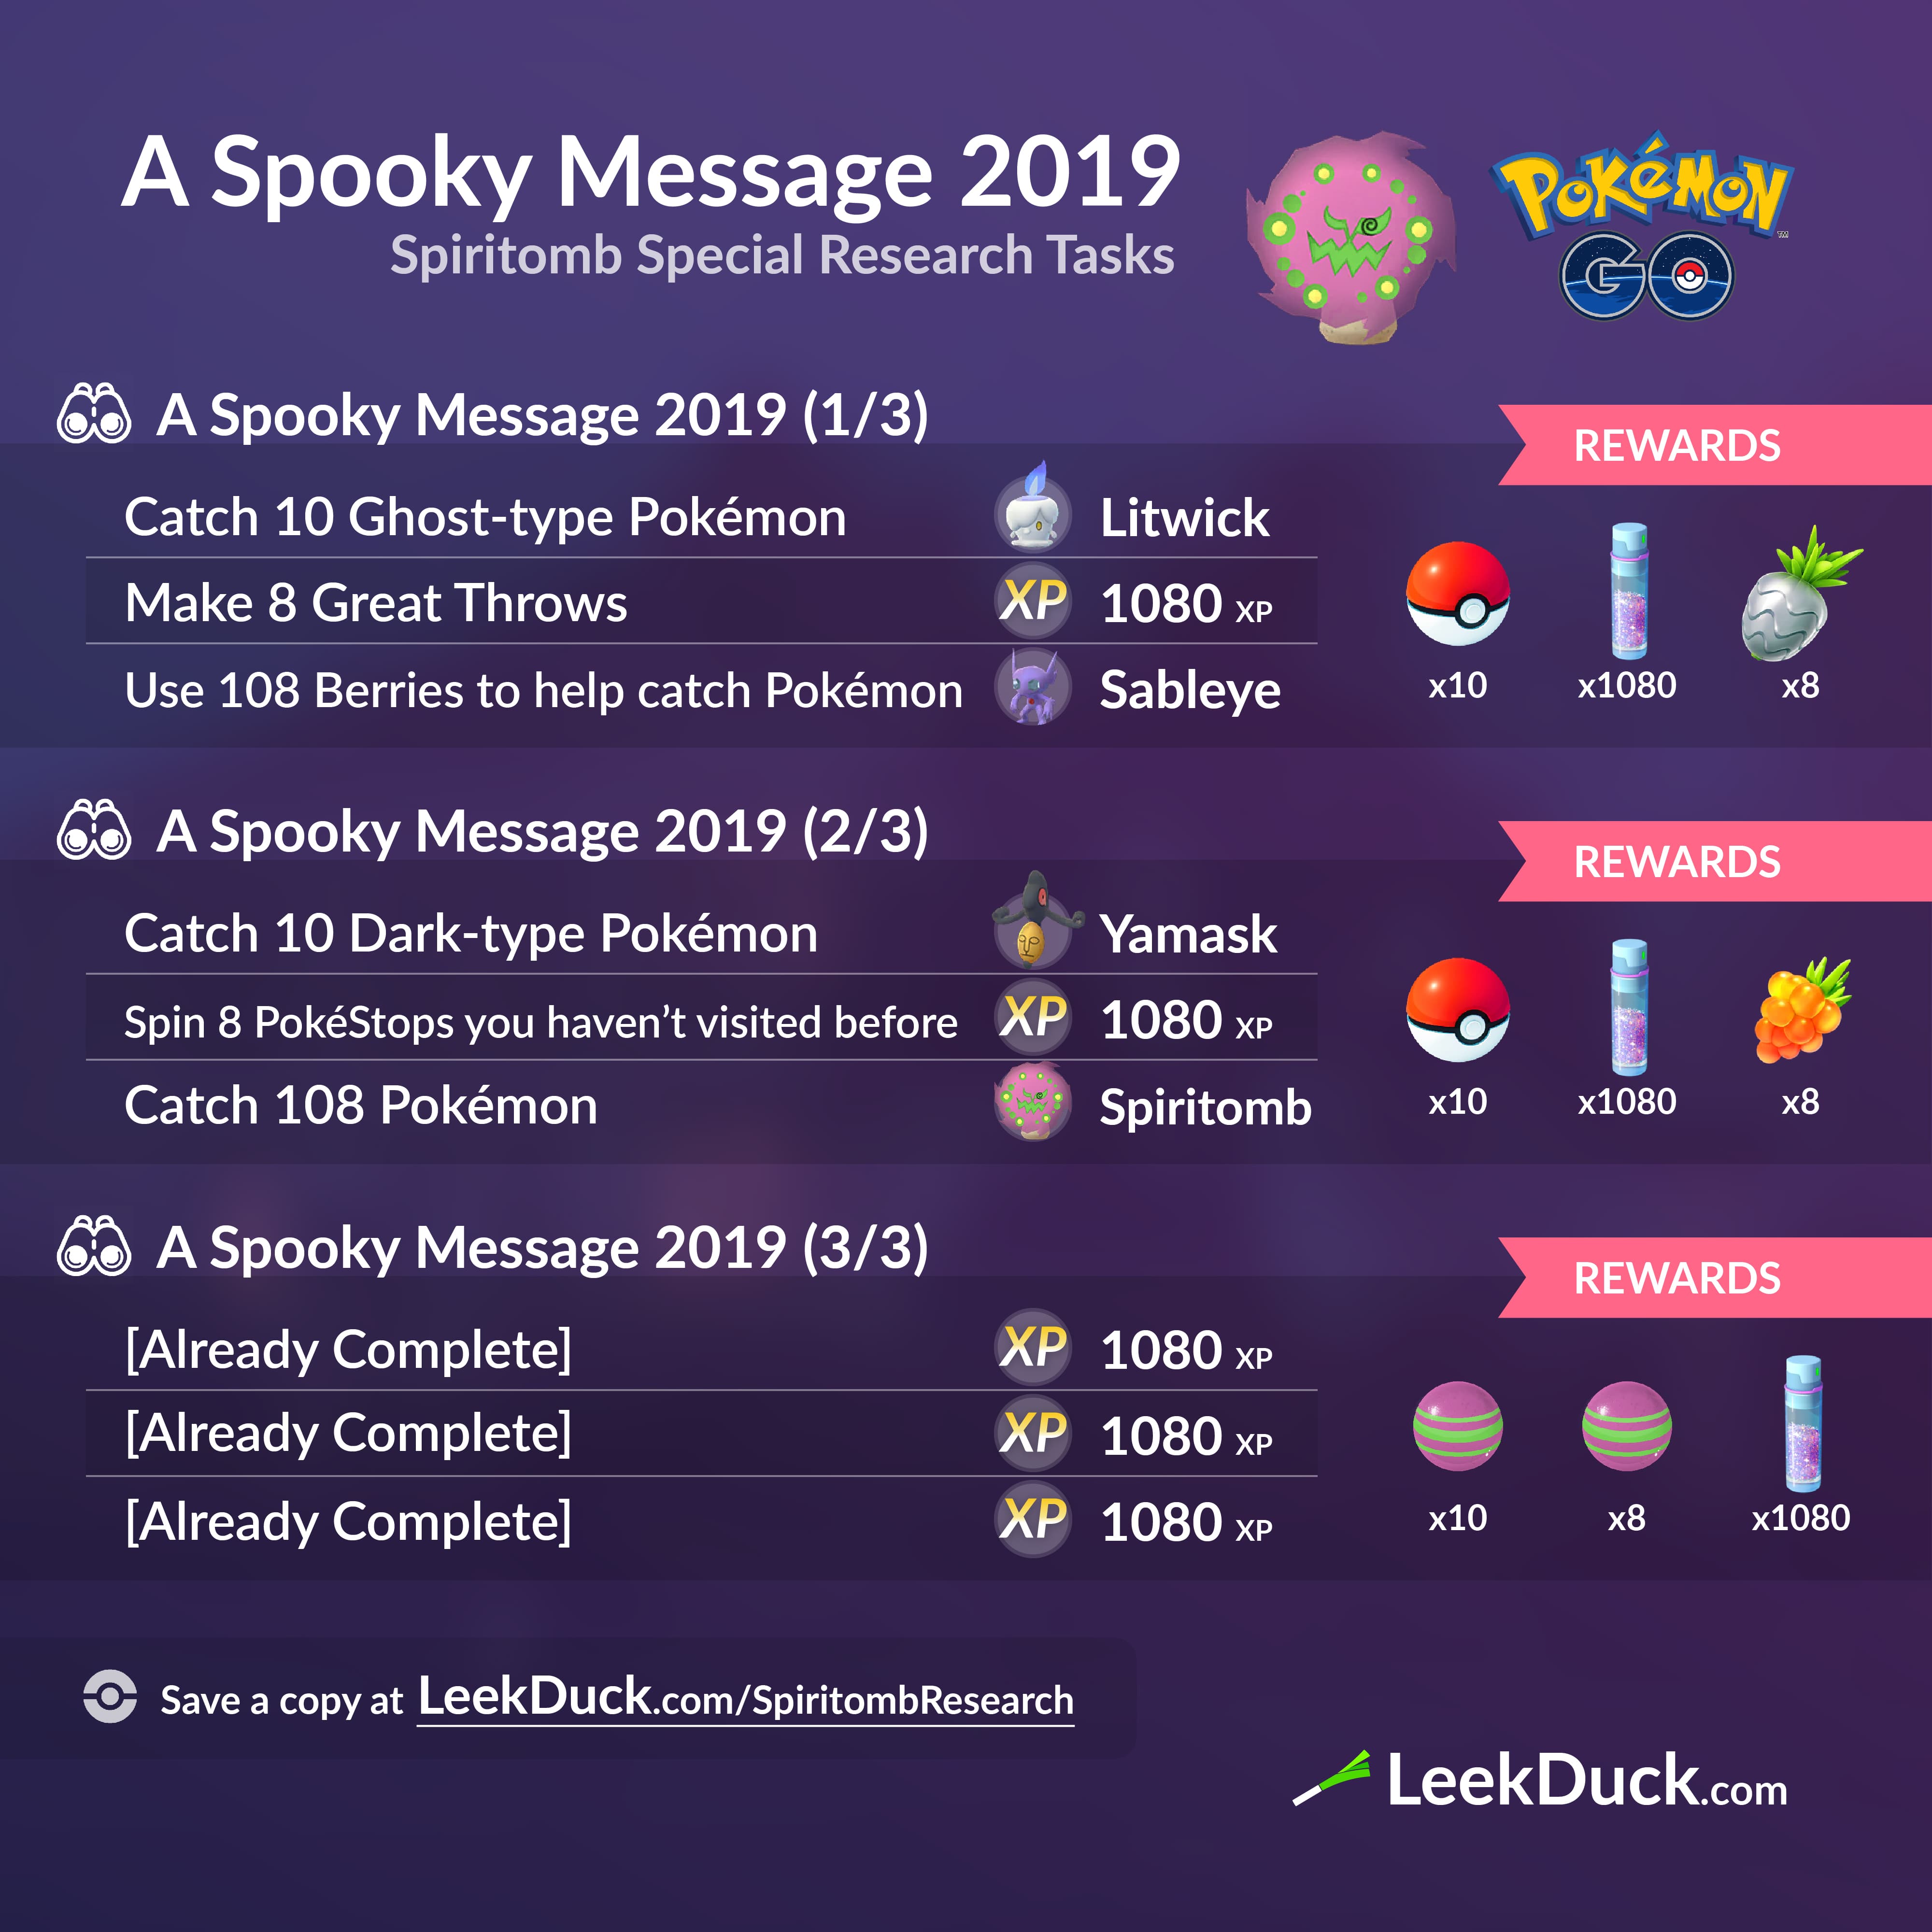 A Spooky Message 2019 Special Research